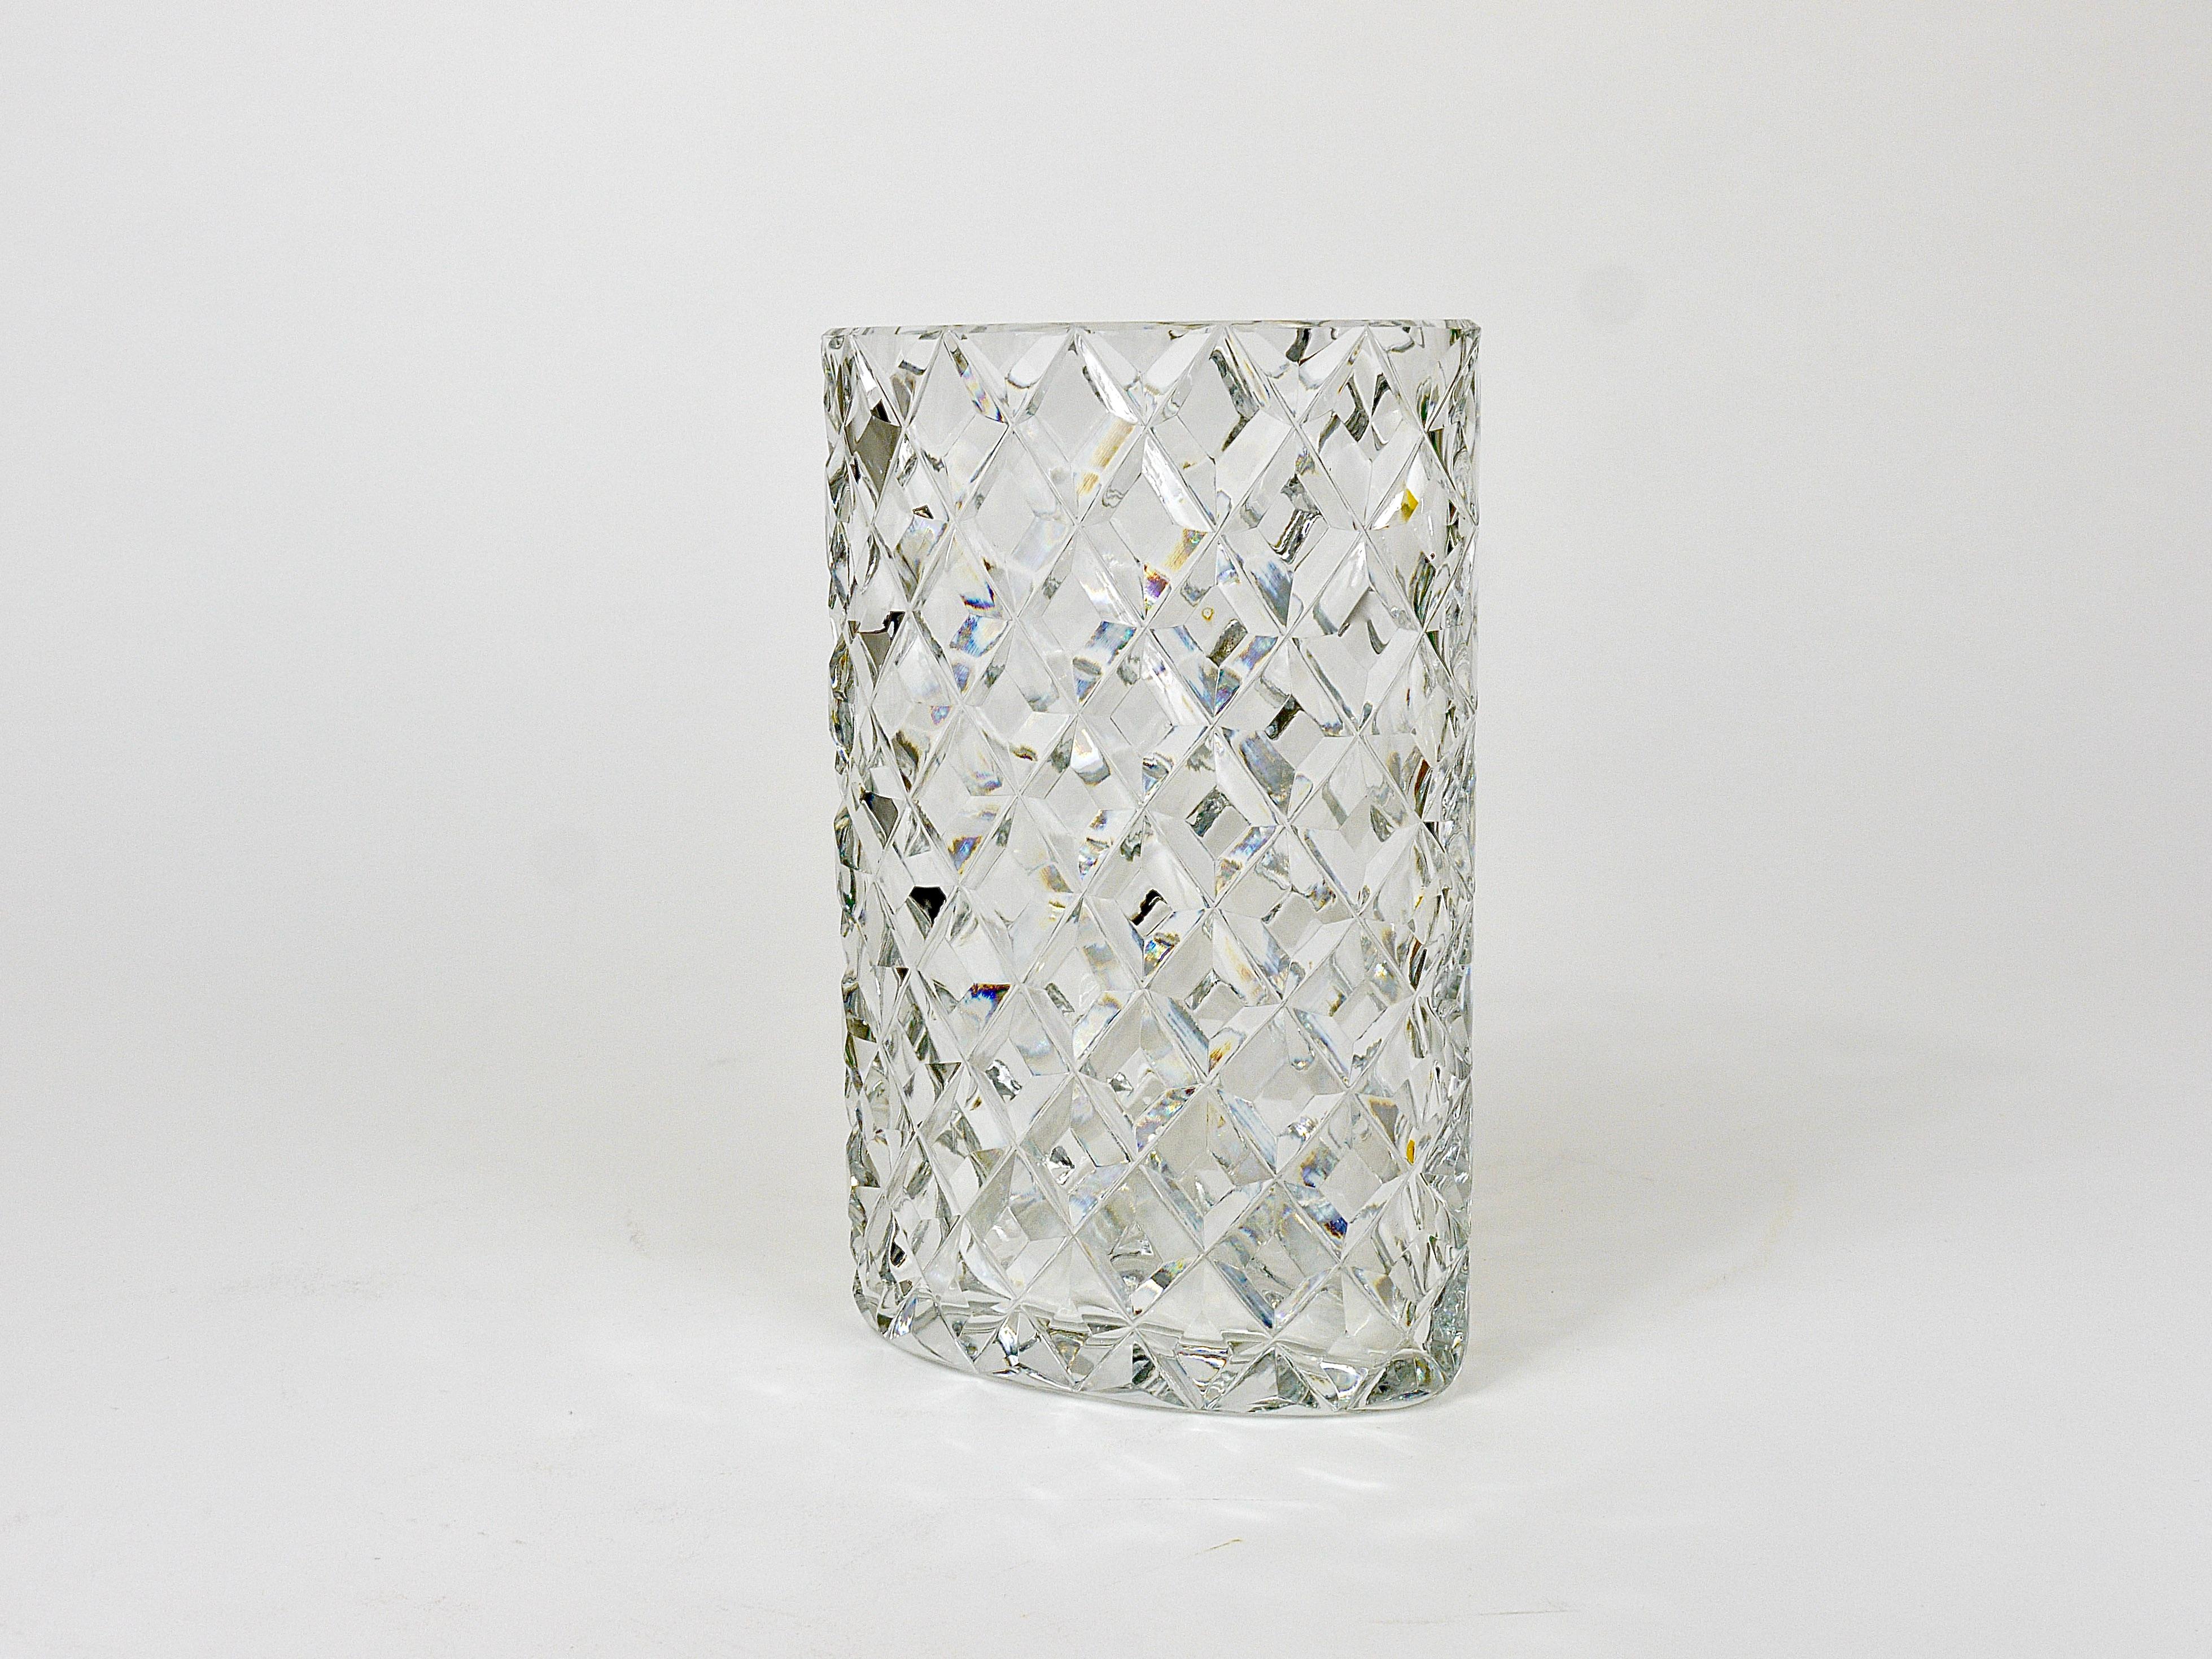 A beautiful oval facetted crystal glass vase from the 1970s, designed and executed by Claus Josef Riedel in Austria. Signed on its underneath, in excellent condition.